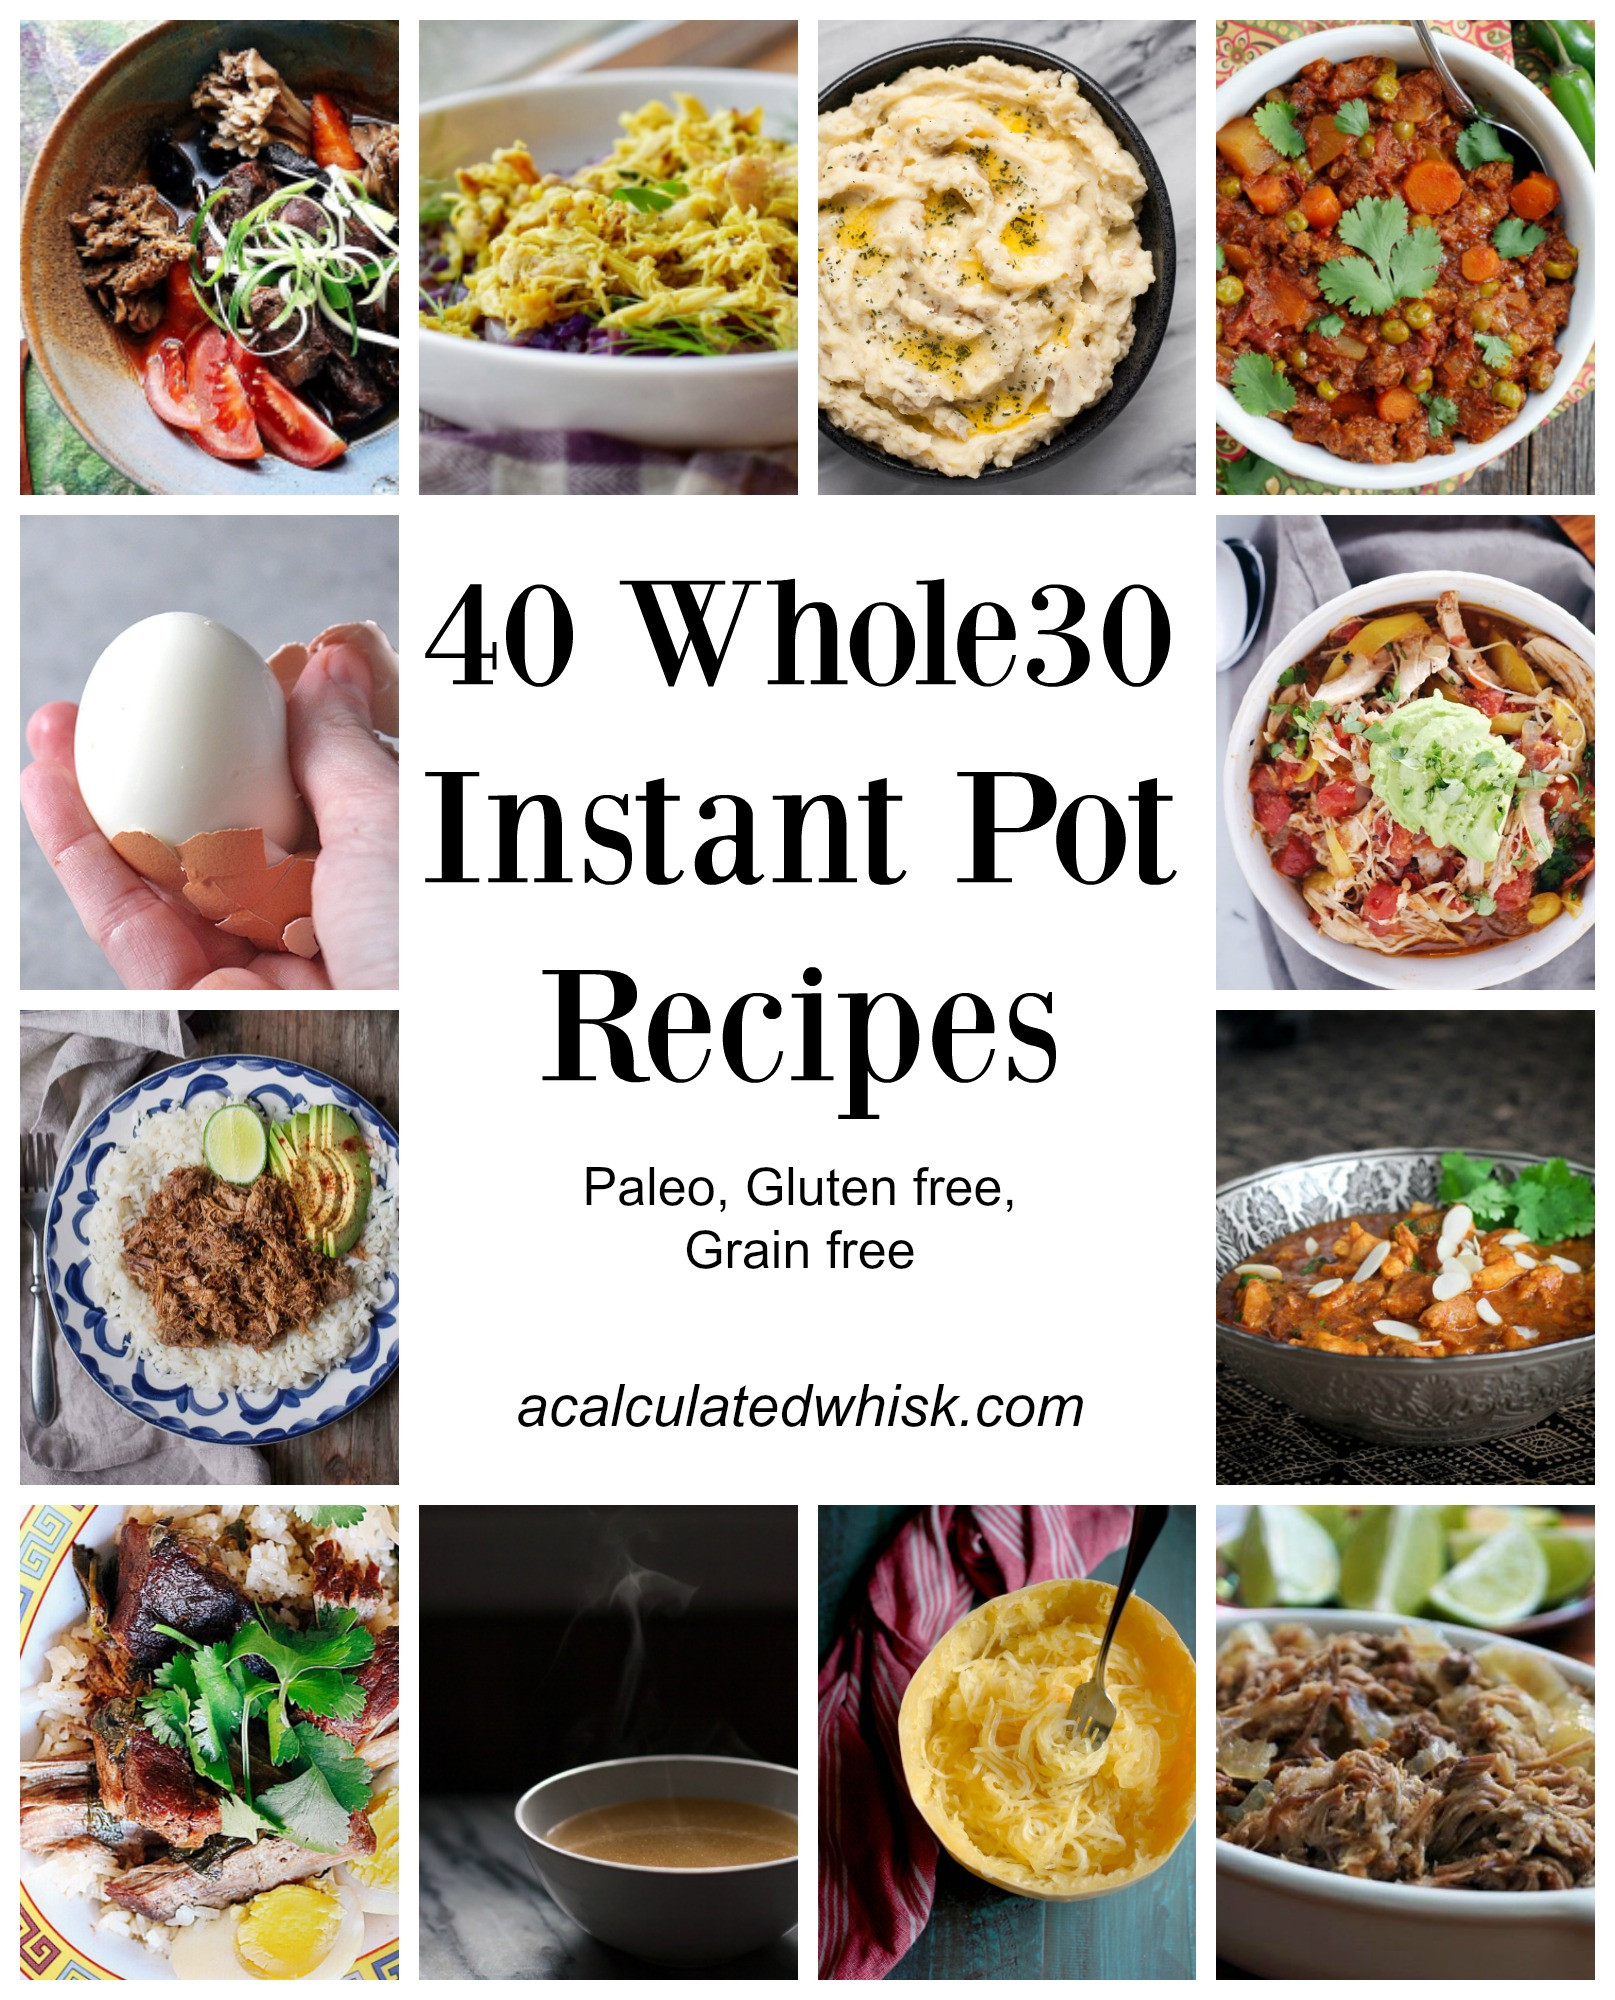 Free Instant Pot Recipes
 40 Whole30 Instant Pot Recipes A Calculated Whisk